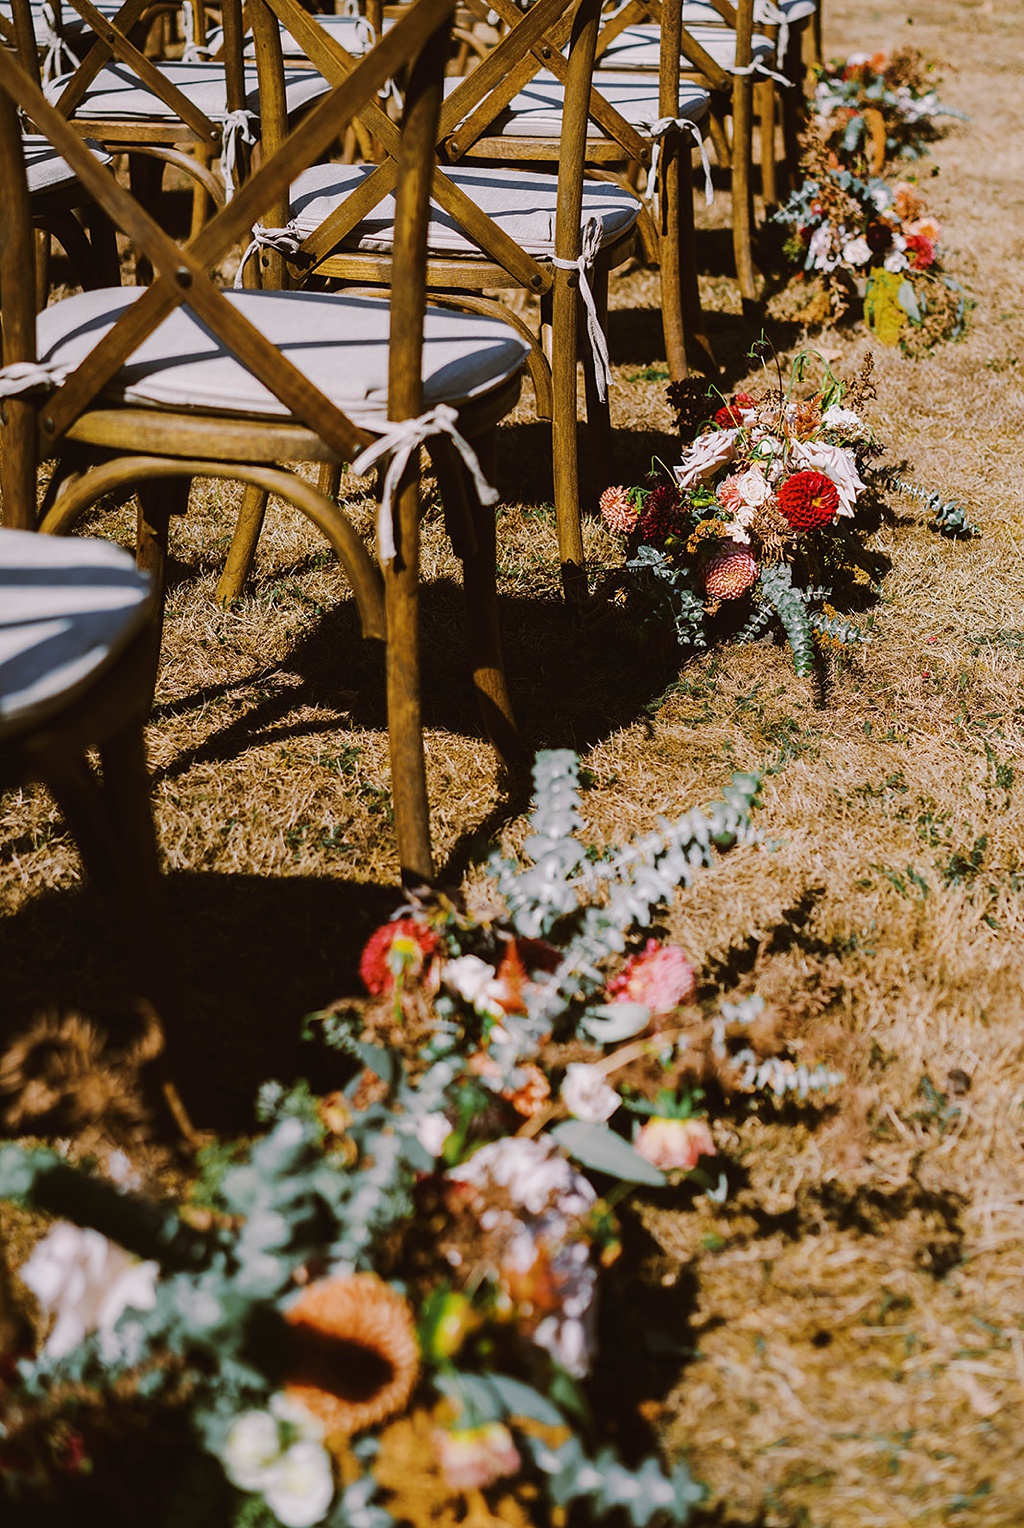 Aisle flowers line the aisle at this summer wedding